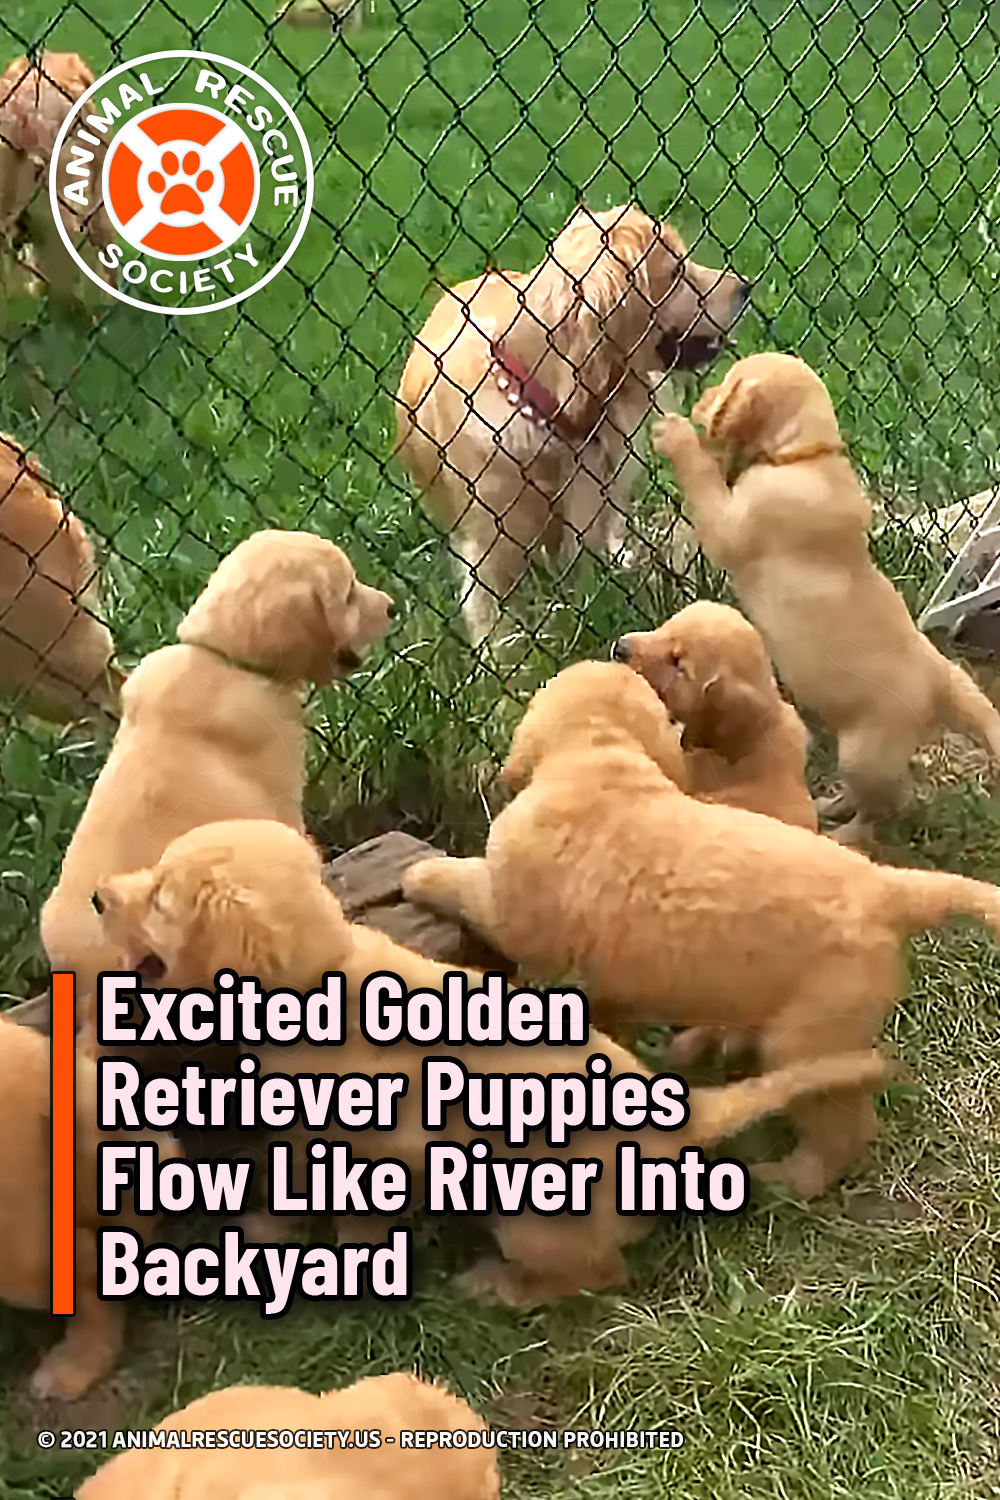 Excited Golden Retriever Puppies Flow Like River Into Backyard